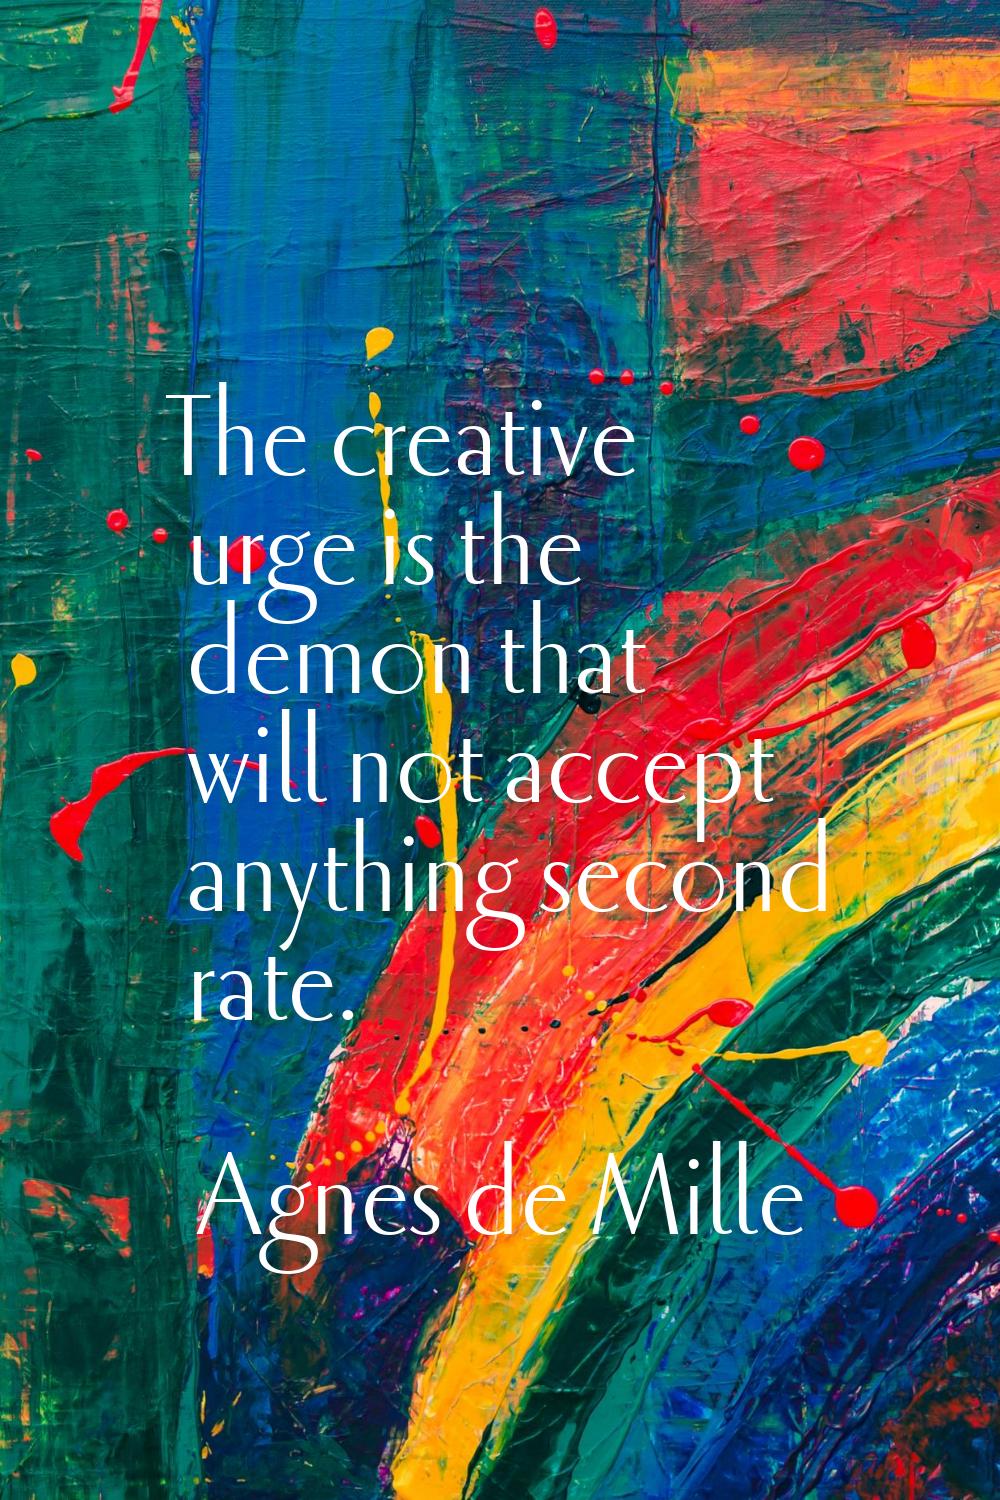 The creative urge is the demon that will not accept anything second rate.